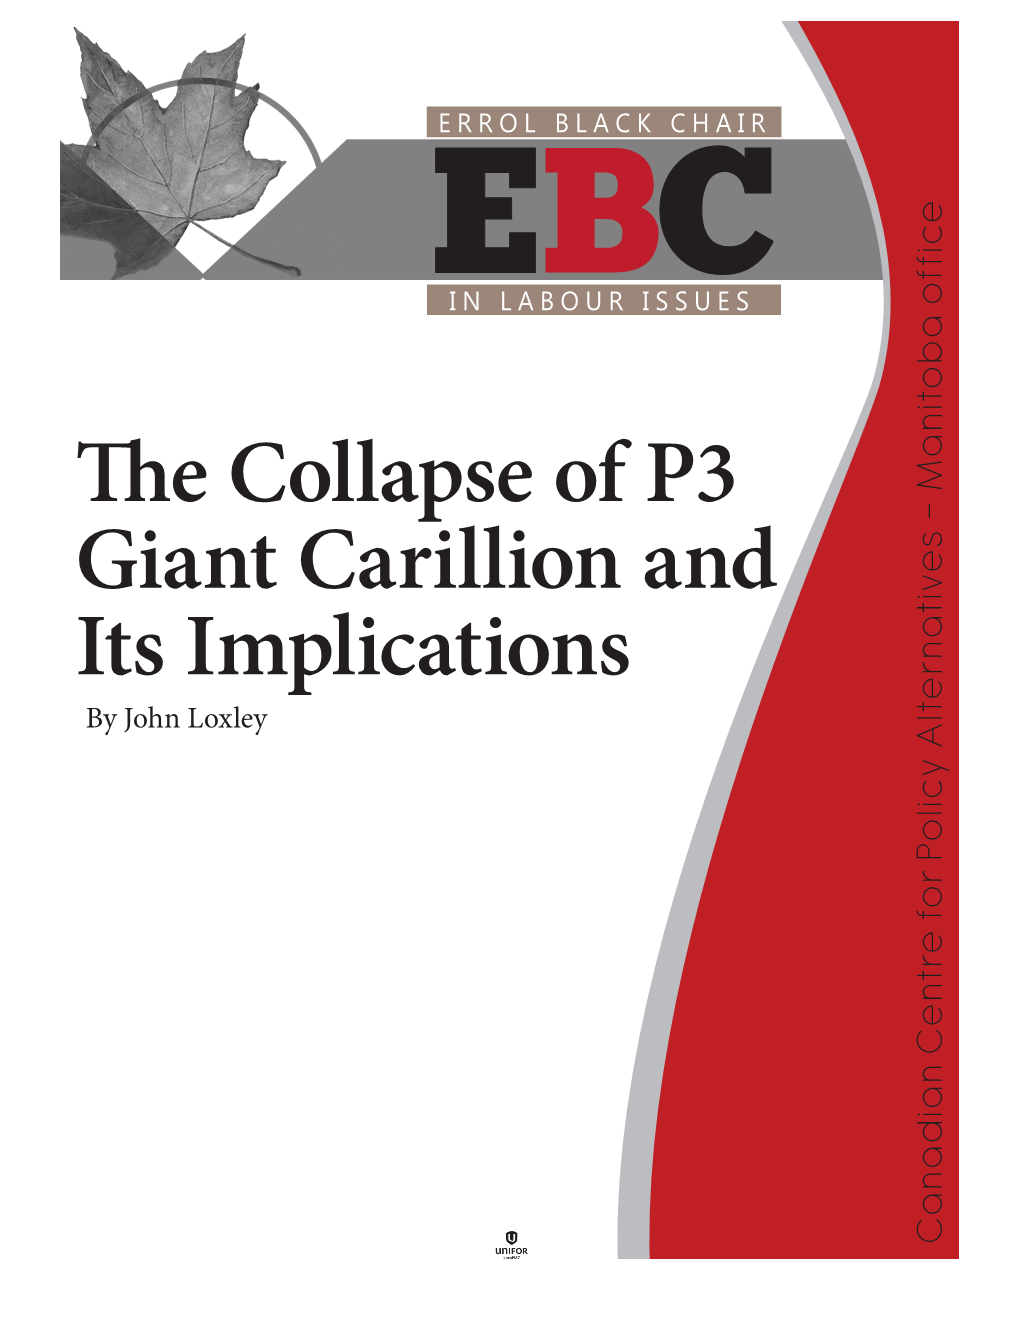 The Collapse of P3 Giant Carillion and Its Implications 1 Are Fed (Local Fire Brigades Are Helping out Here!), Them, That They Are Unable to Be Objective